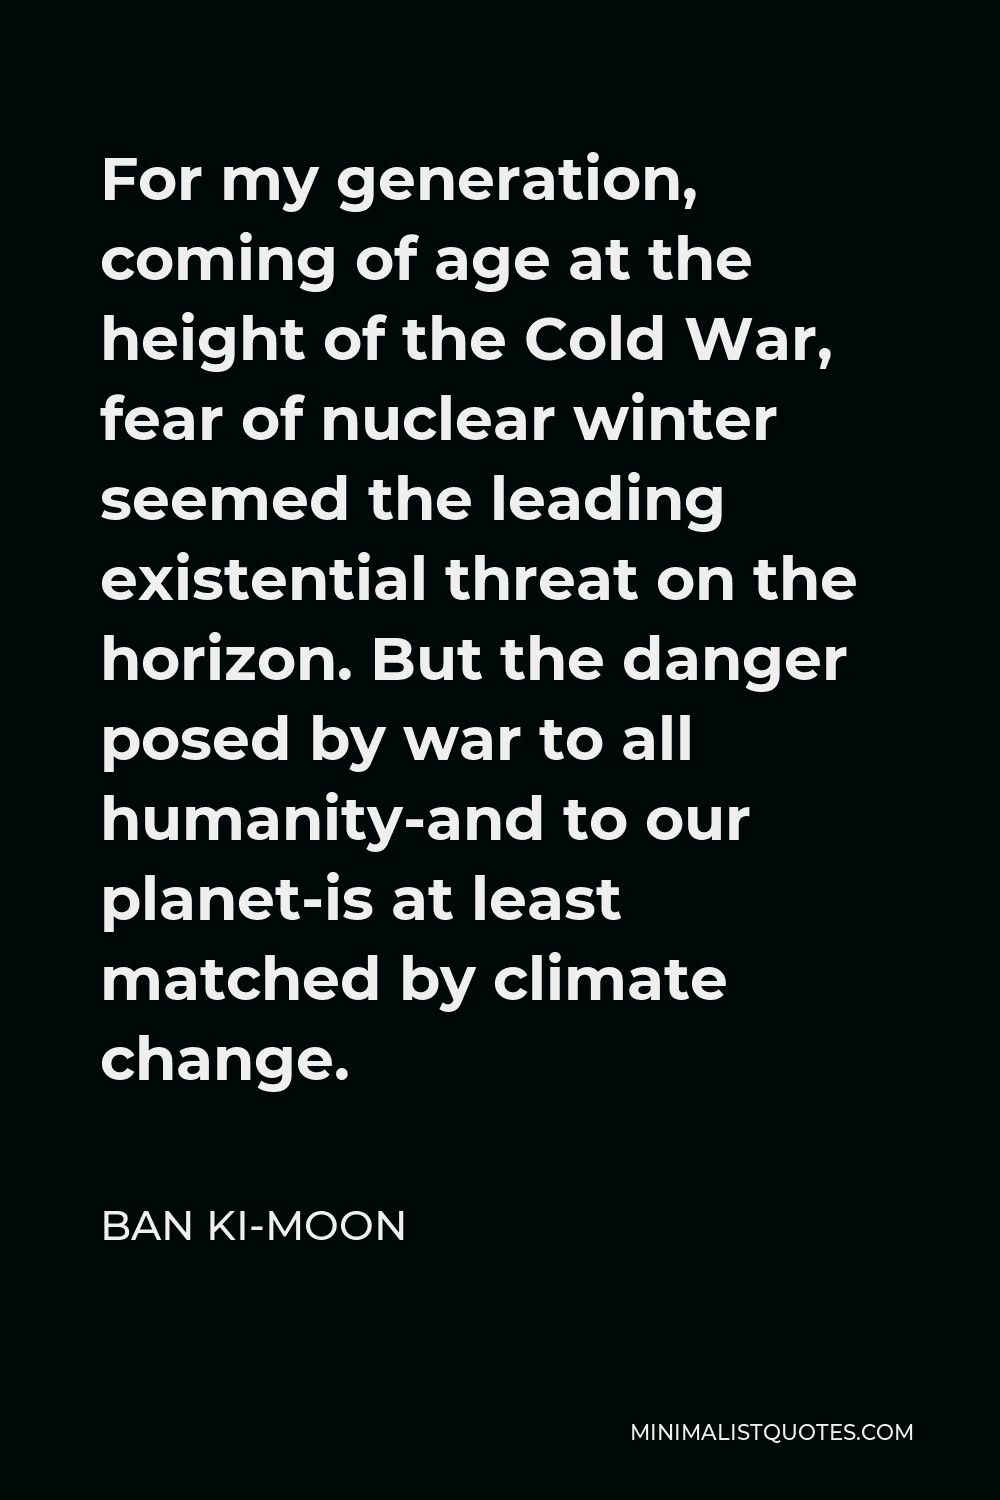 Ban Ki-moon Quote - For my generation, coming of age at the height of the Cold War, fear of nuclear winter seemed the leading existential threat on the horizon. But the danger posed by war to all humanity-and to our planet-is at least matched by climate change.